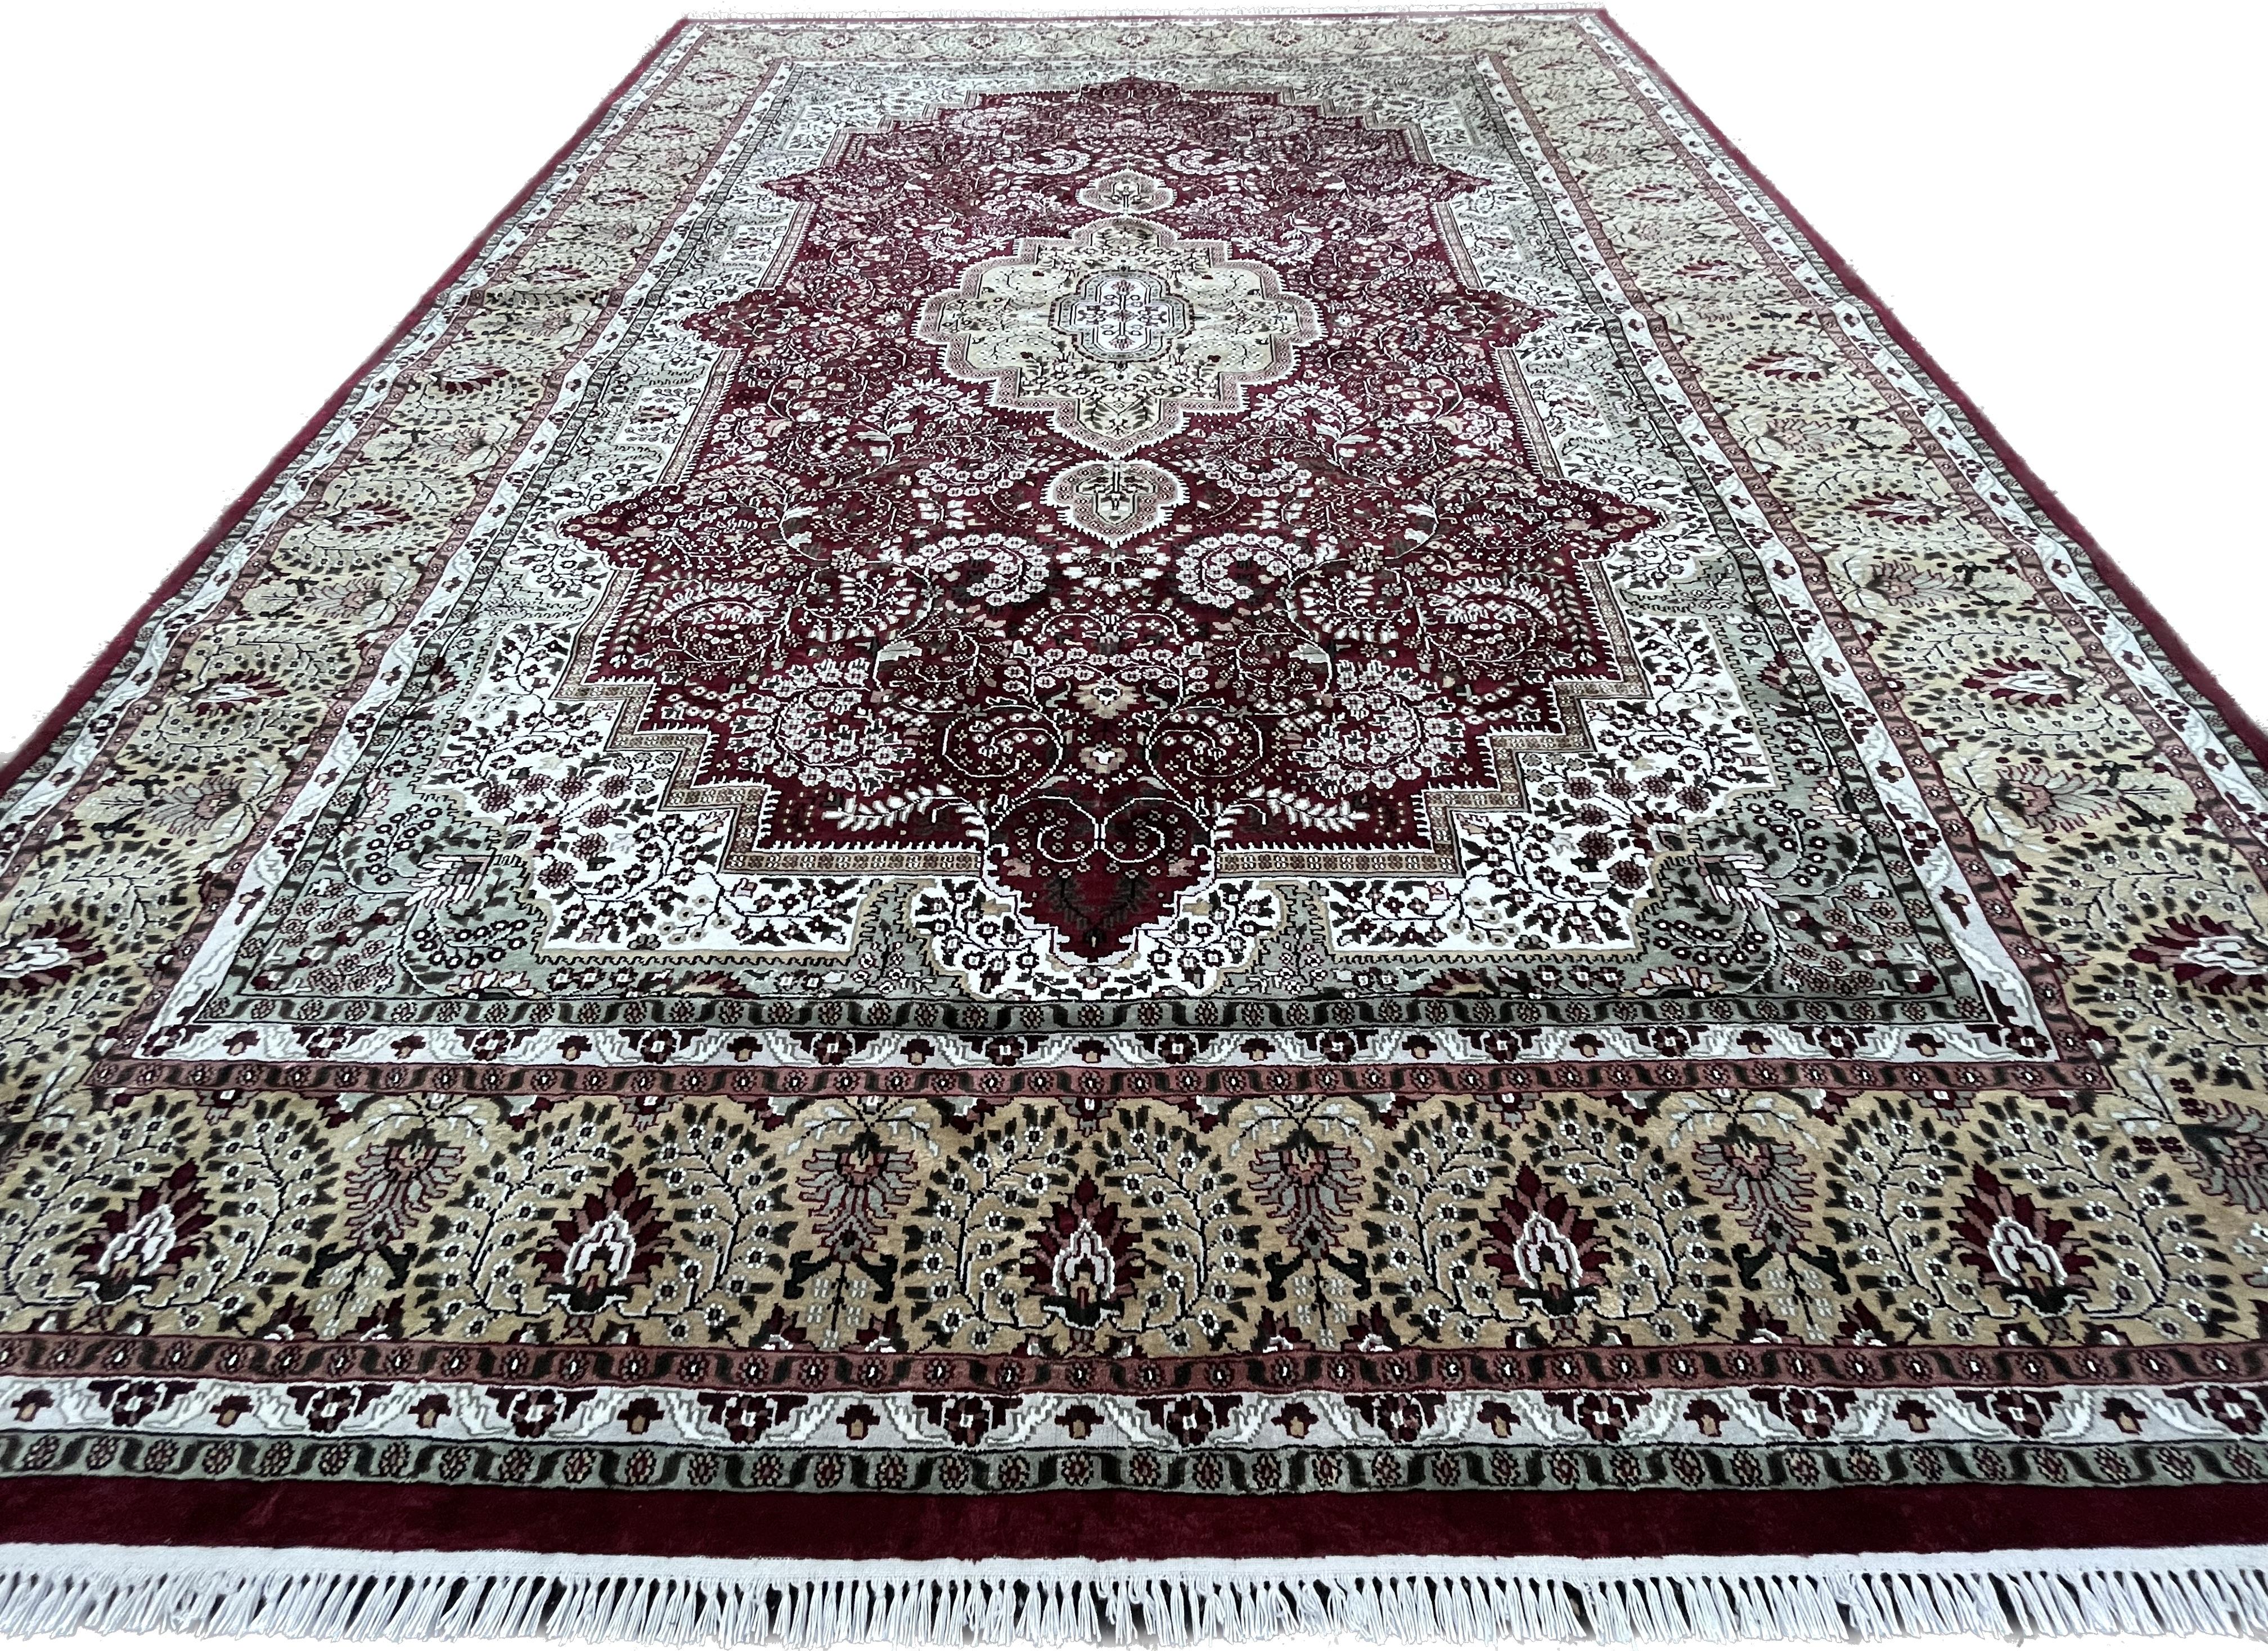 The manufacture of carpets started in Pakistan in the same way as in India.
When the country separated from India, a large part of the carpet weavers migrated to the Pakistani side. Most of them found work in Lahore and Karachi at a time when